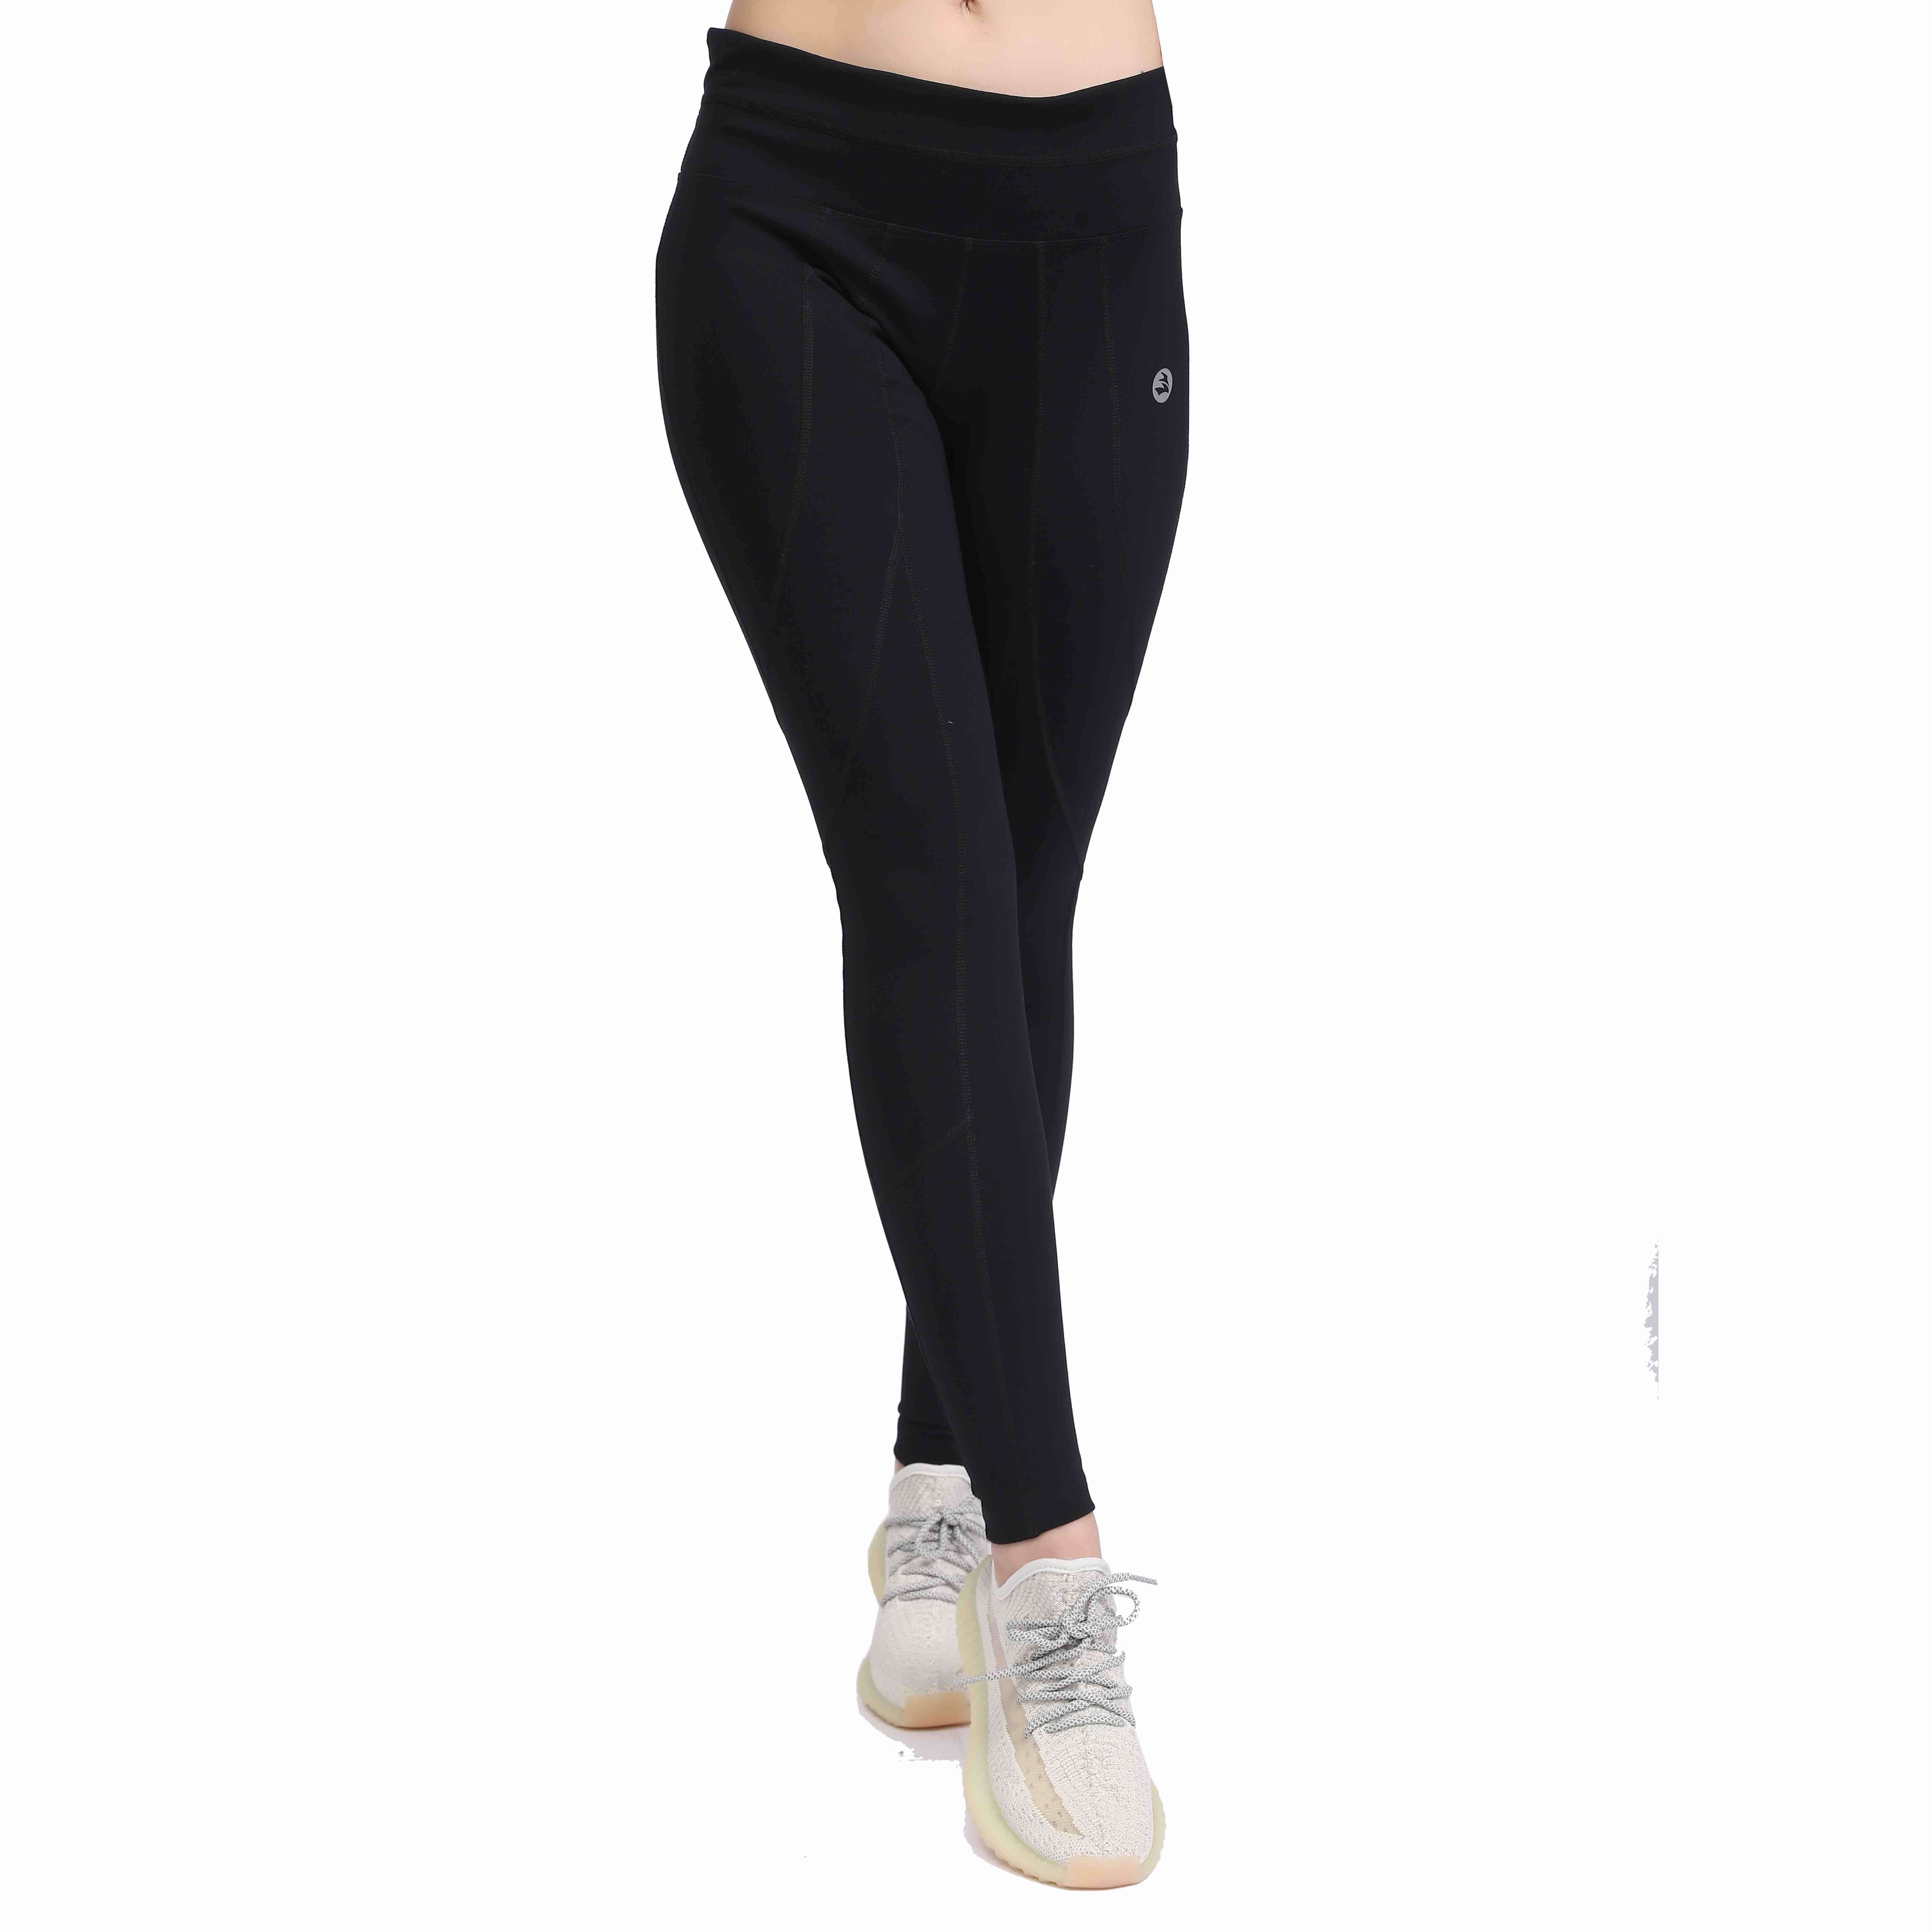 Women's Tummy Control Workout Running Yoga Leggings With Crotch Gusset